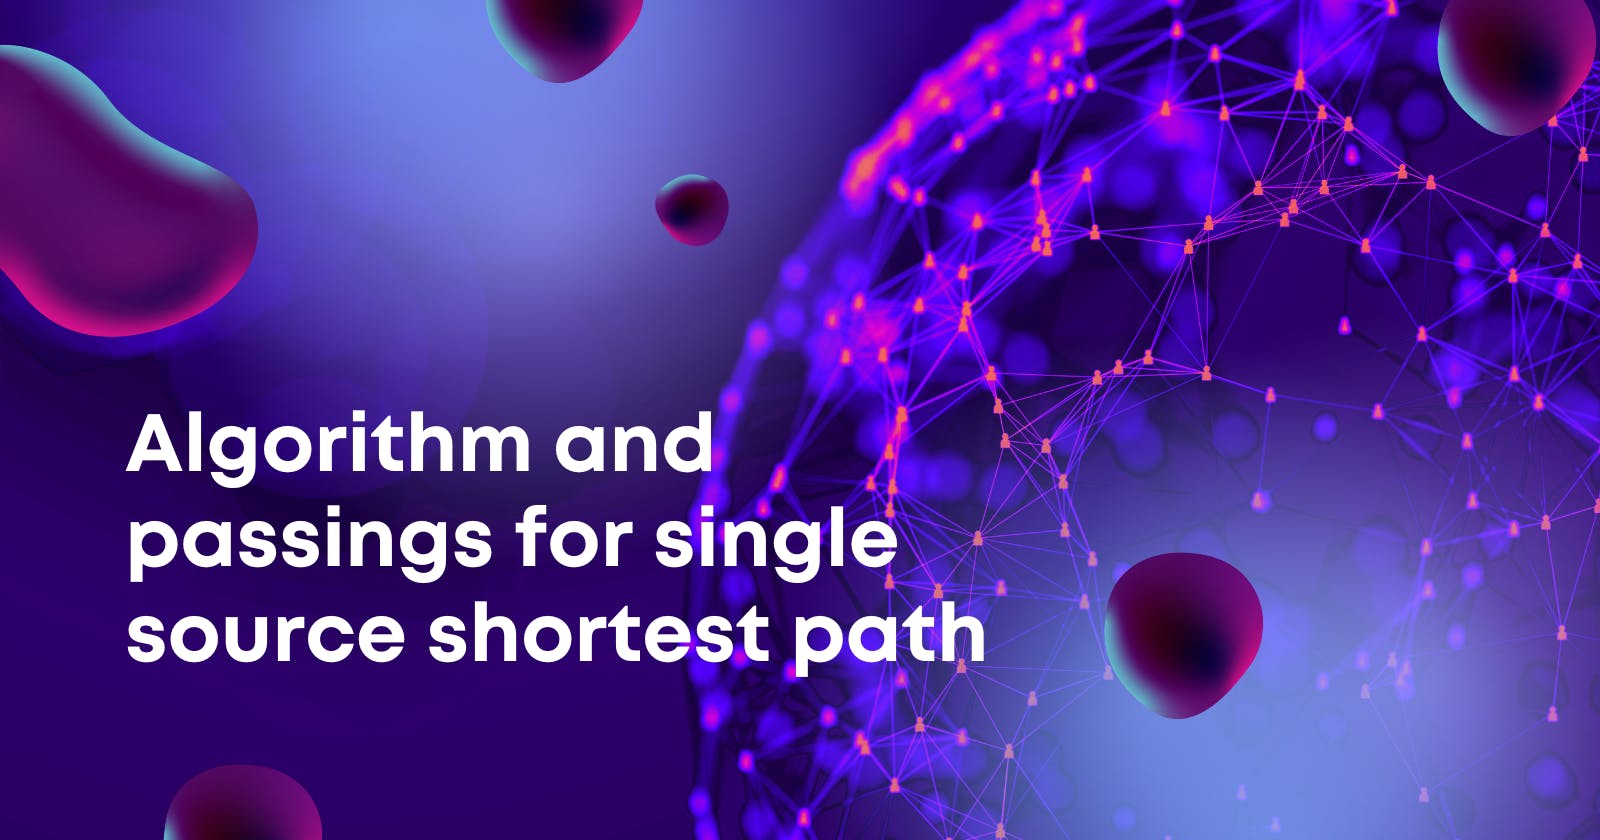 Popular algorithm and passings for single source shortest path